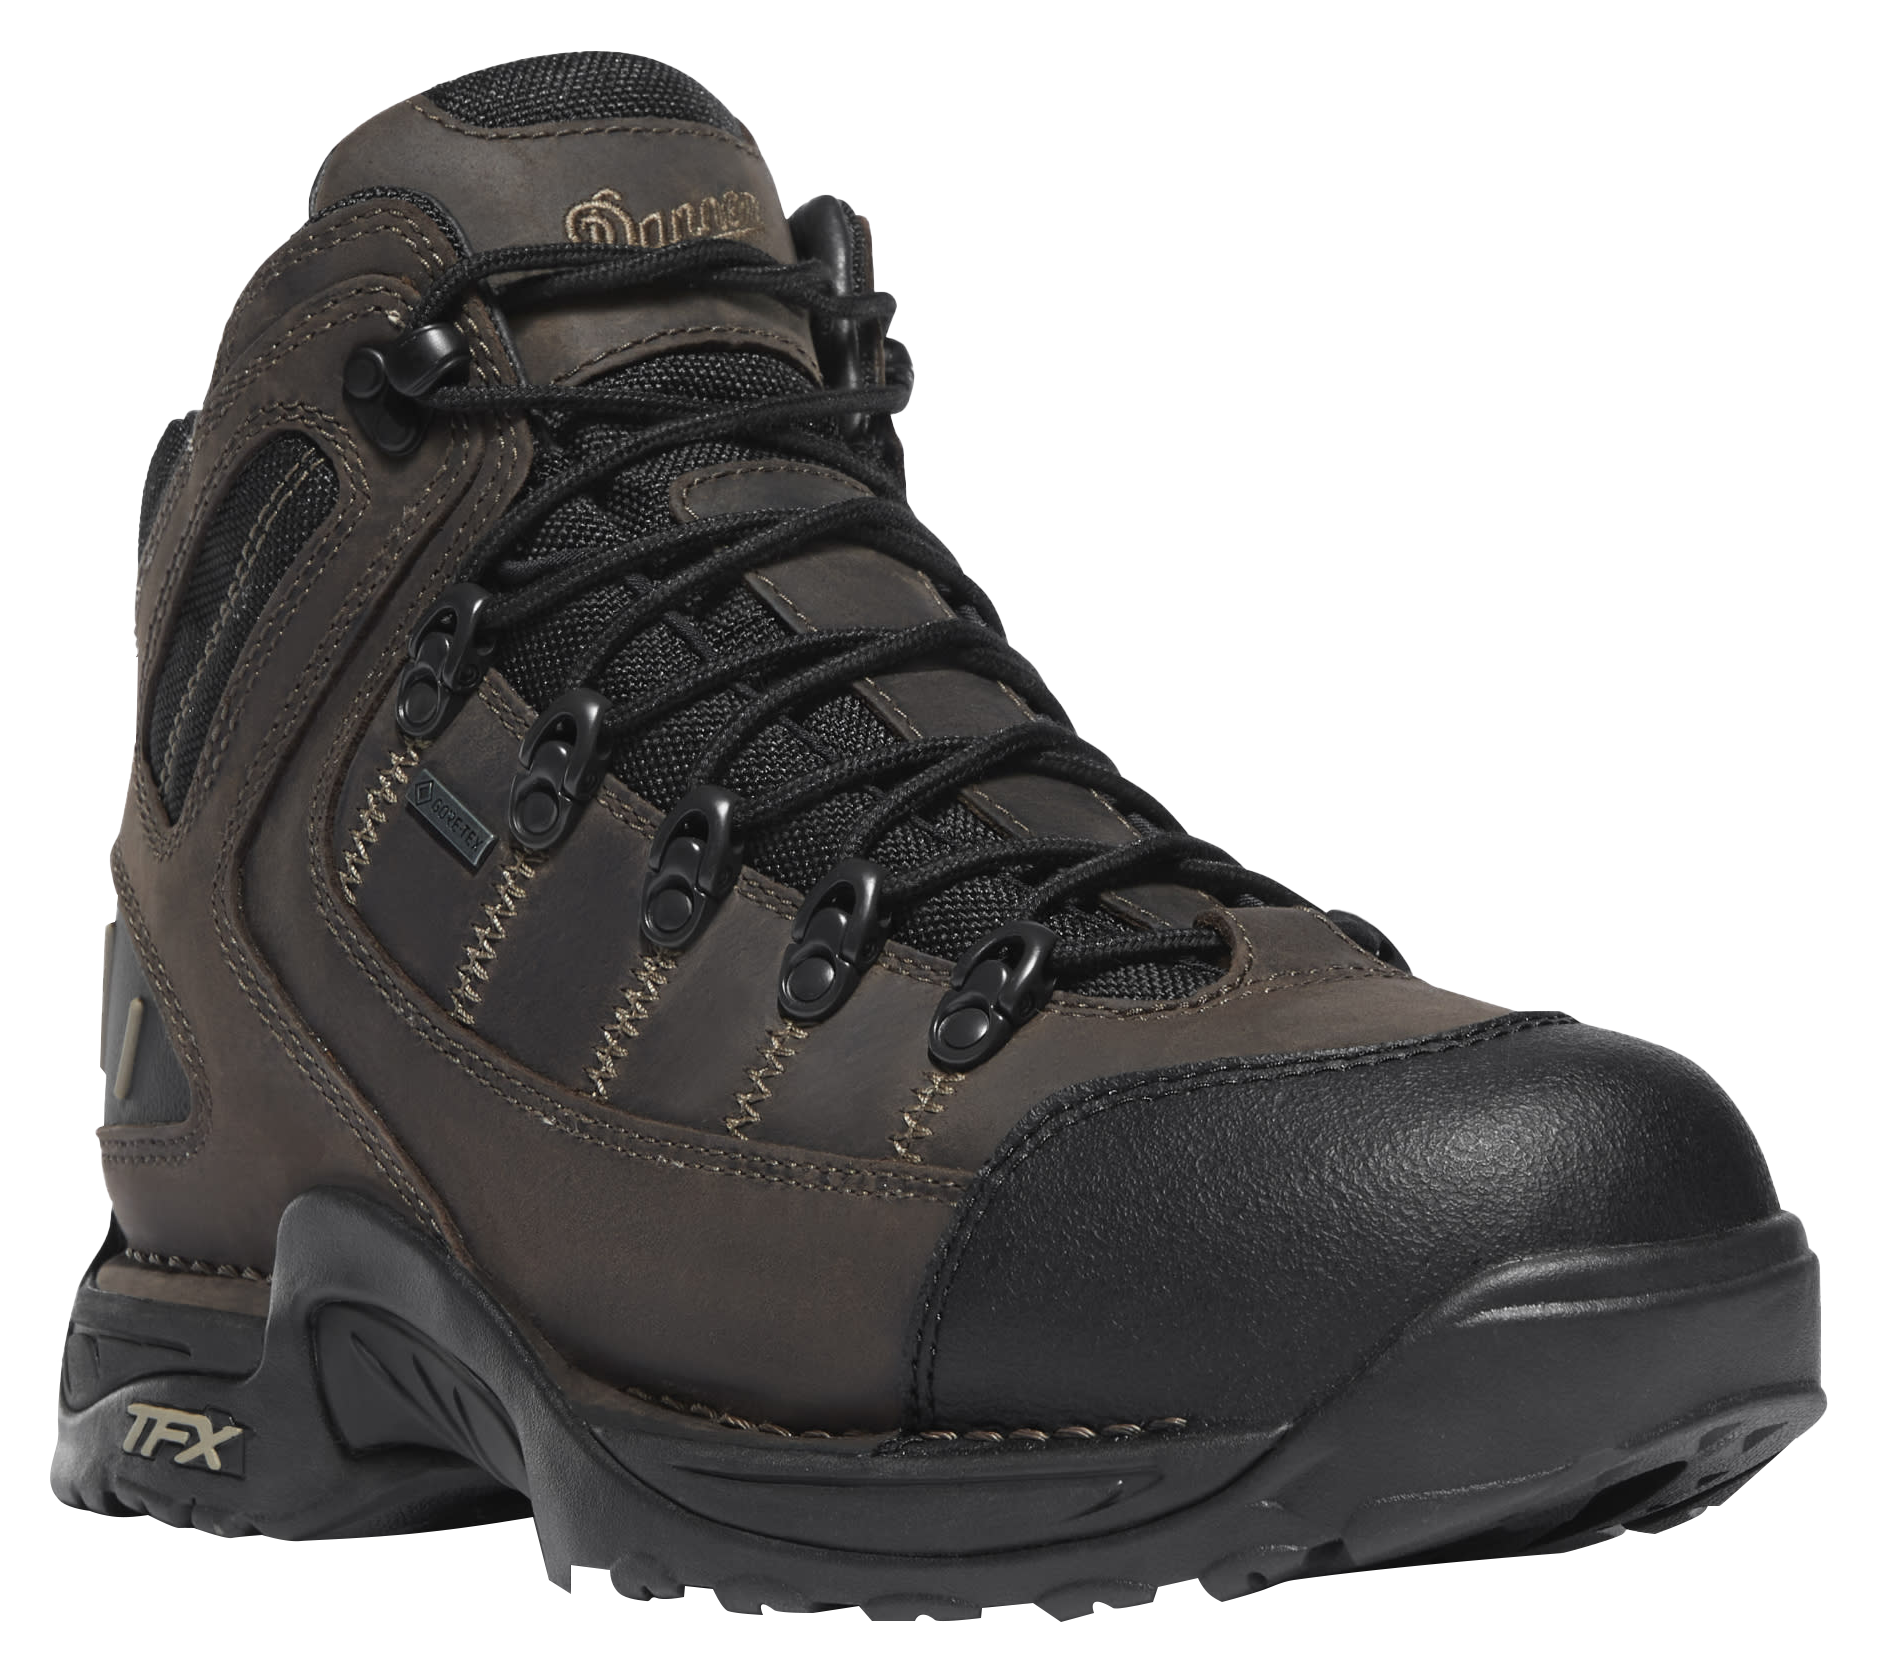 Danner 453 GORE-TEX Waterproof Hiking Boots for Men - Loam Brown/Chocolate Chip - 9M